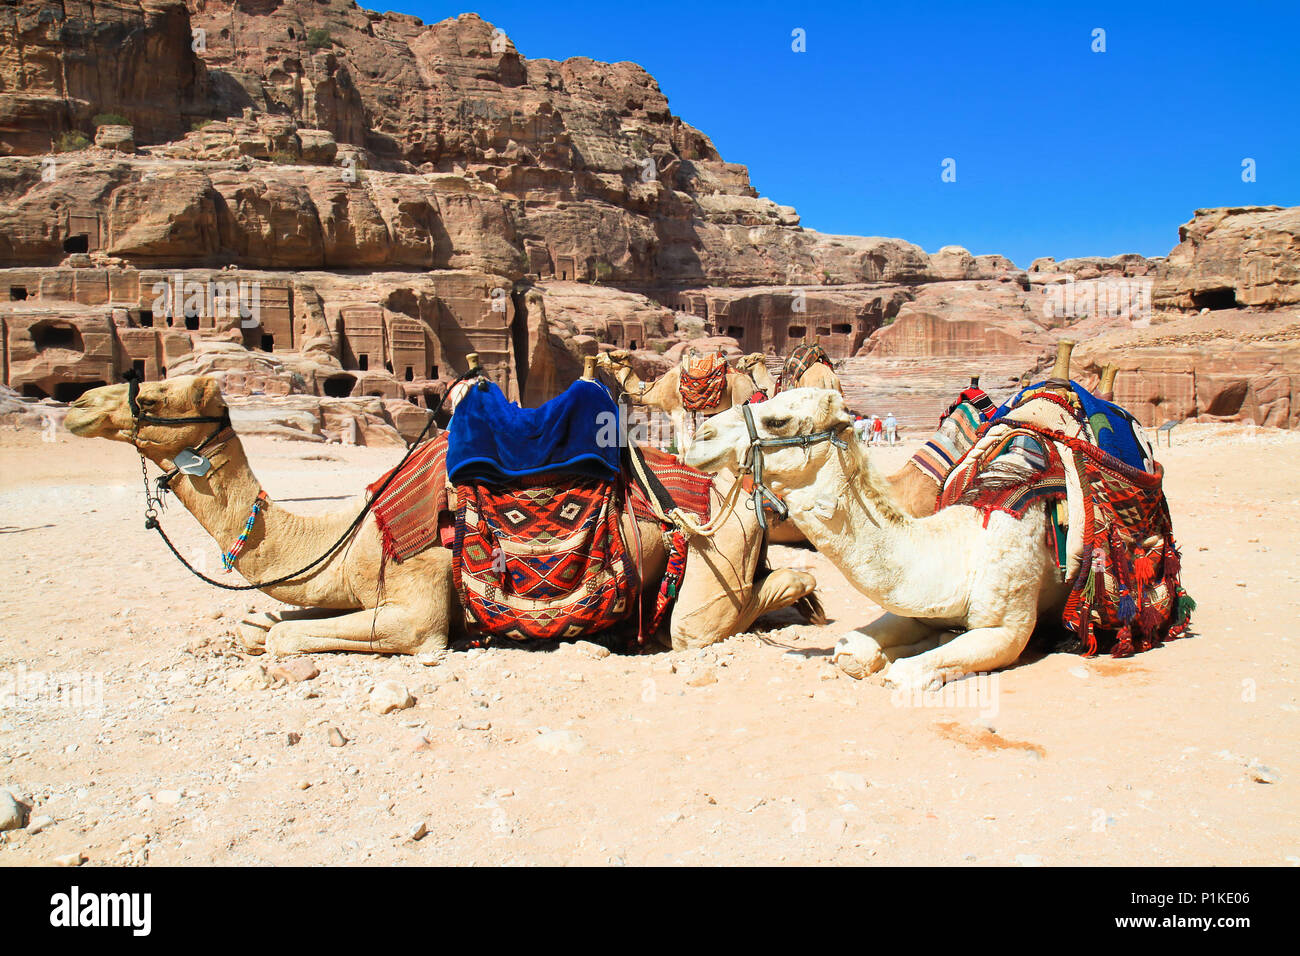 Camels in ancient city of Petra. It was carved out the rocks. It is now an UNESCO World Heritage Site. Petra, Jordan Stock Photo